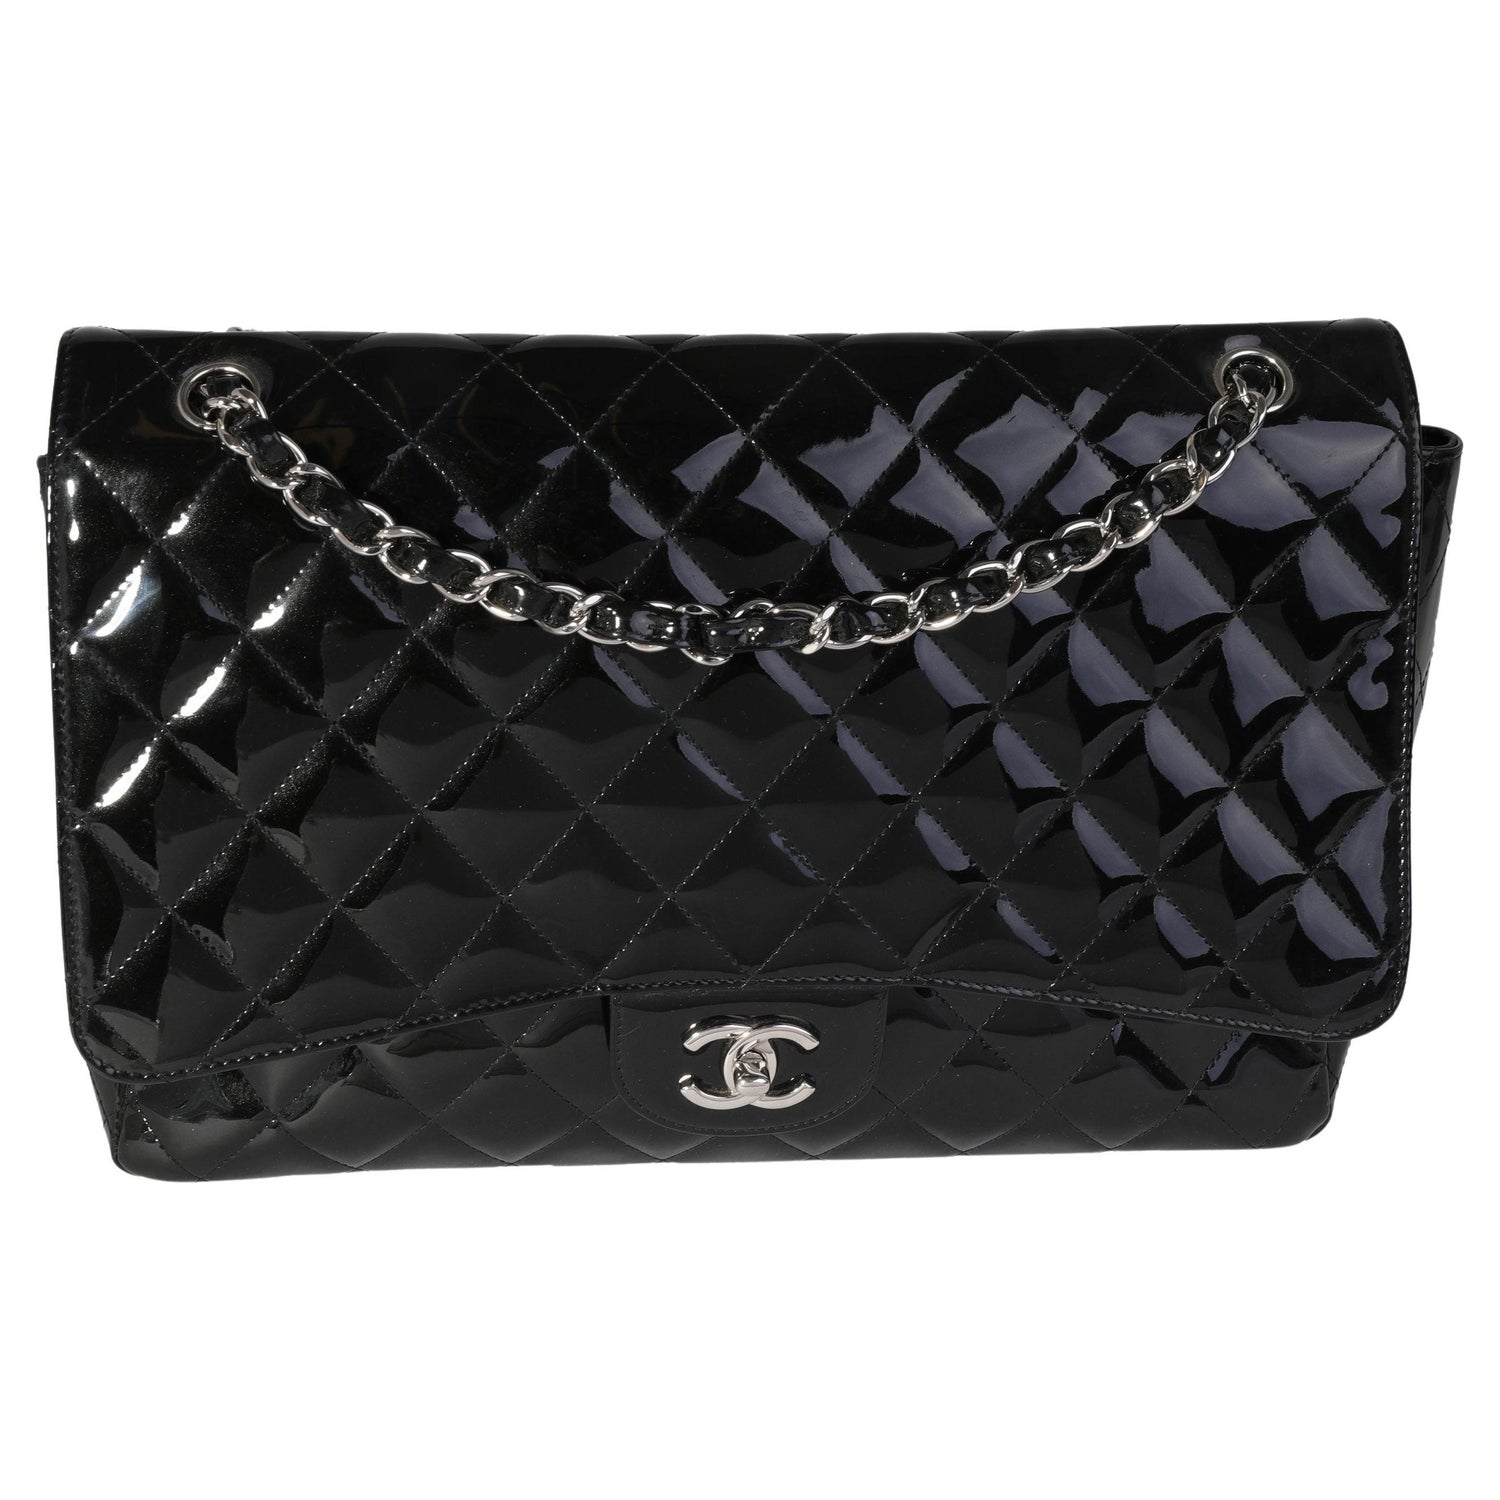 2014 Chanel Black Quilted Caviar Leather Maxi Classic Double